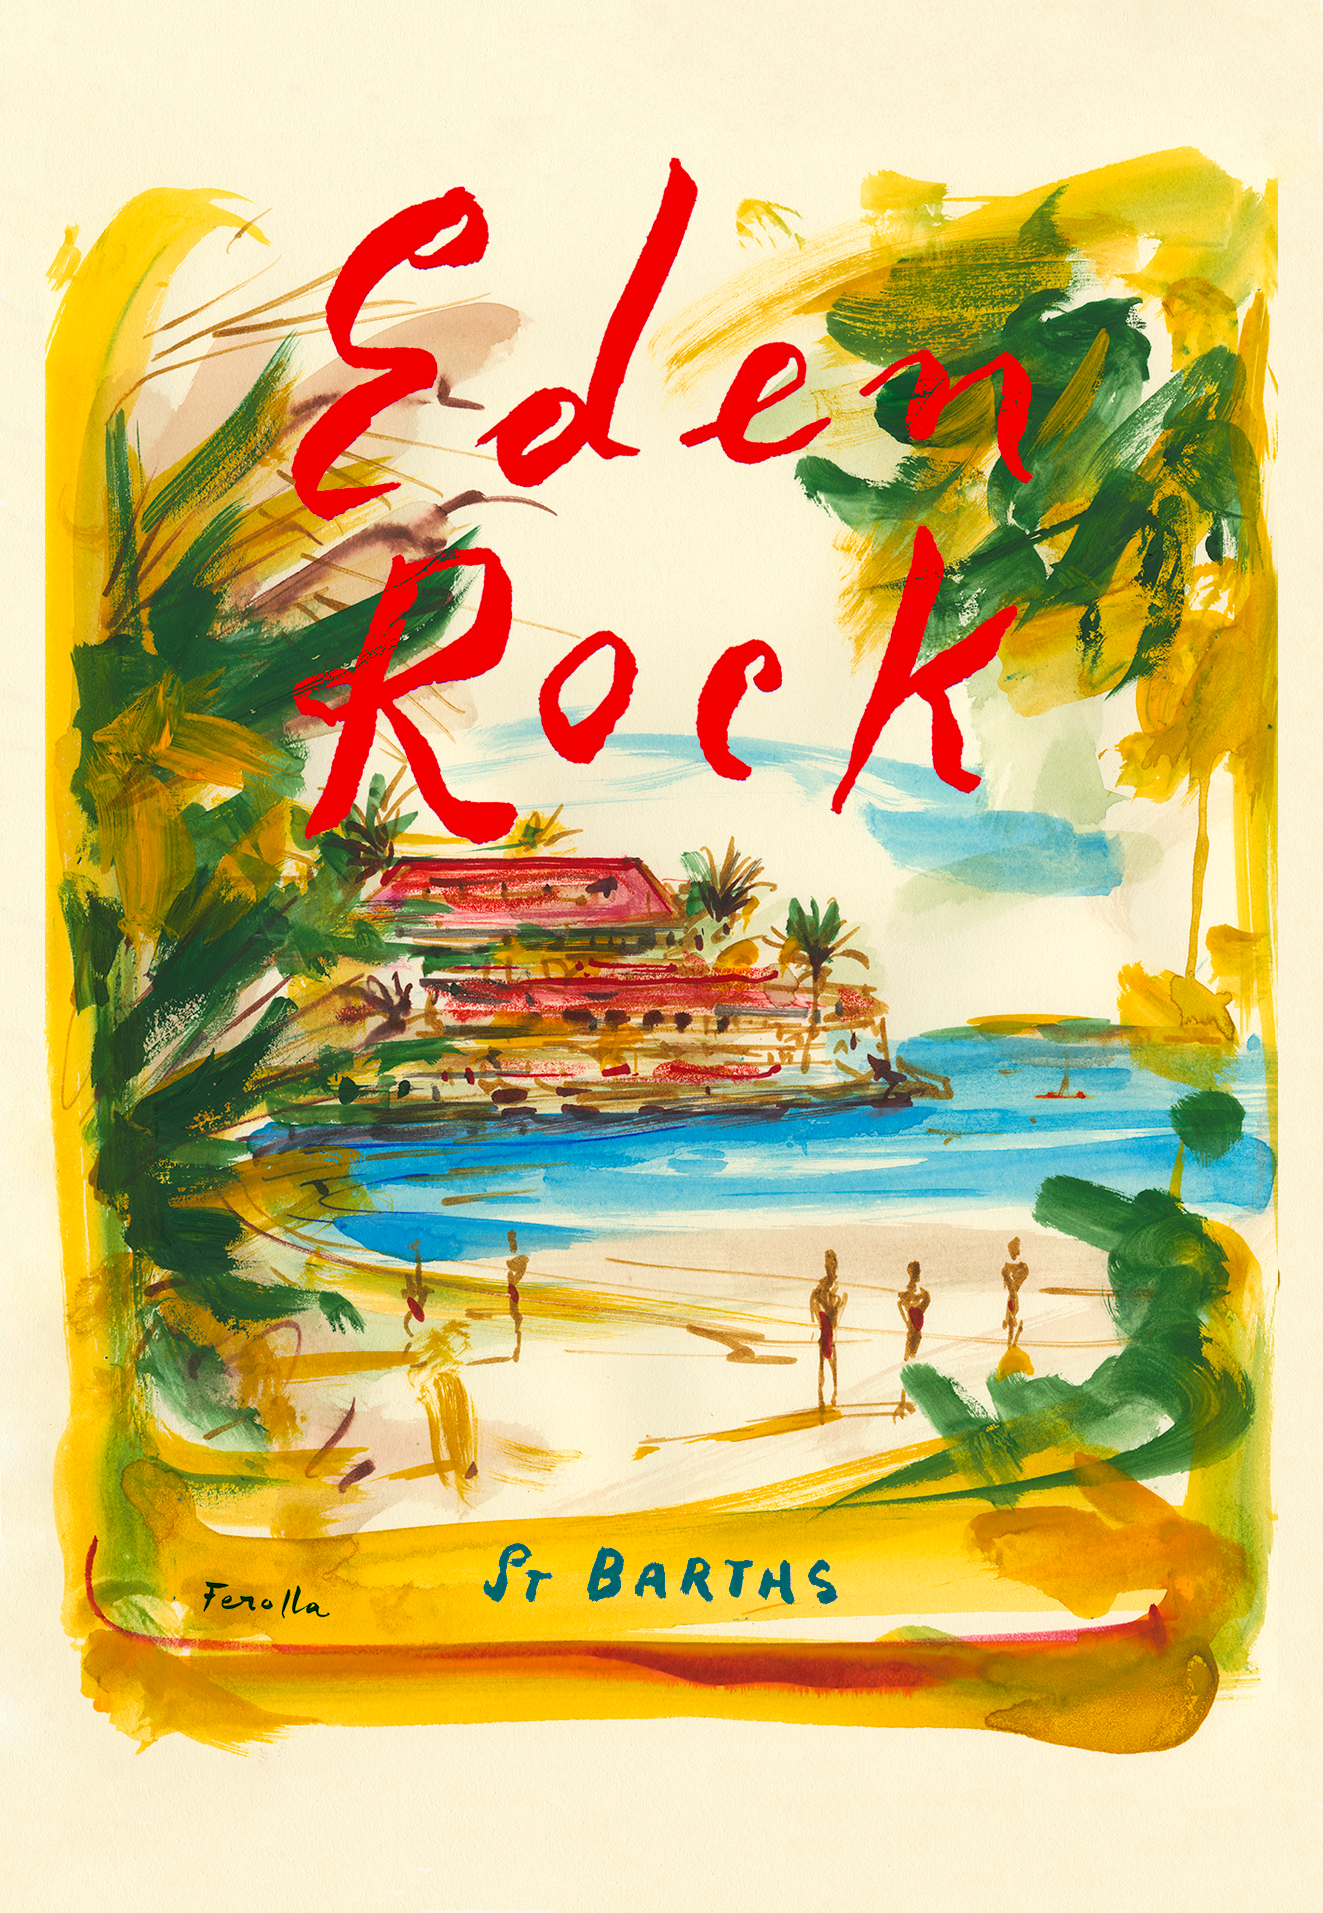 Eden Rock - St Barths Art Print by Andrea Ferolla for Oetker Collection Hotel Boutiques